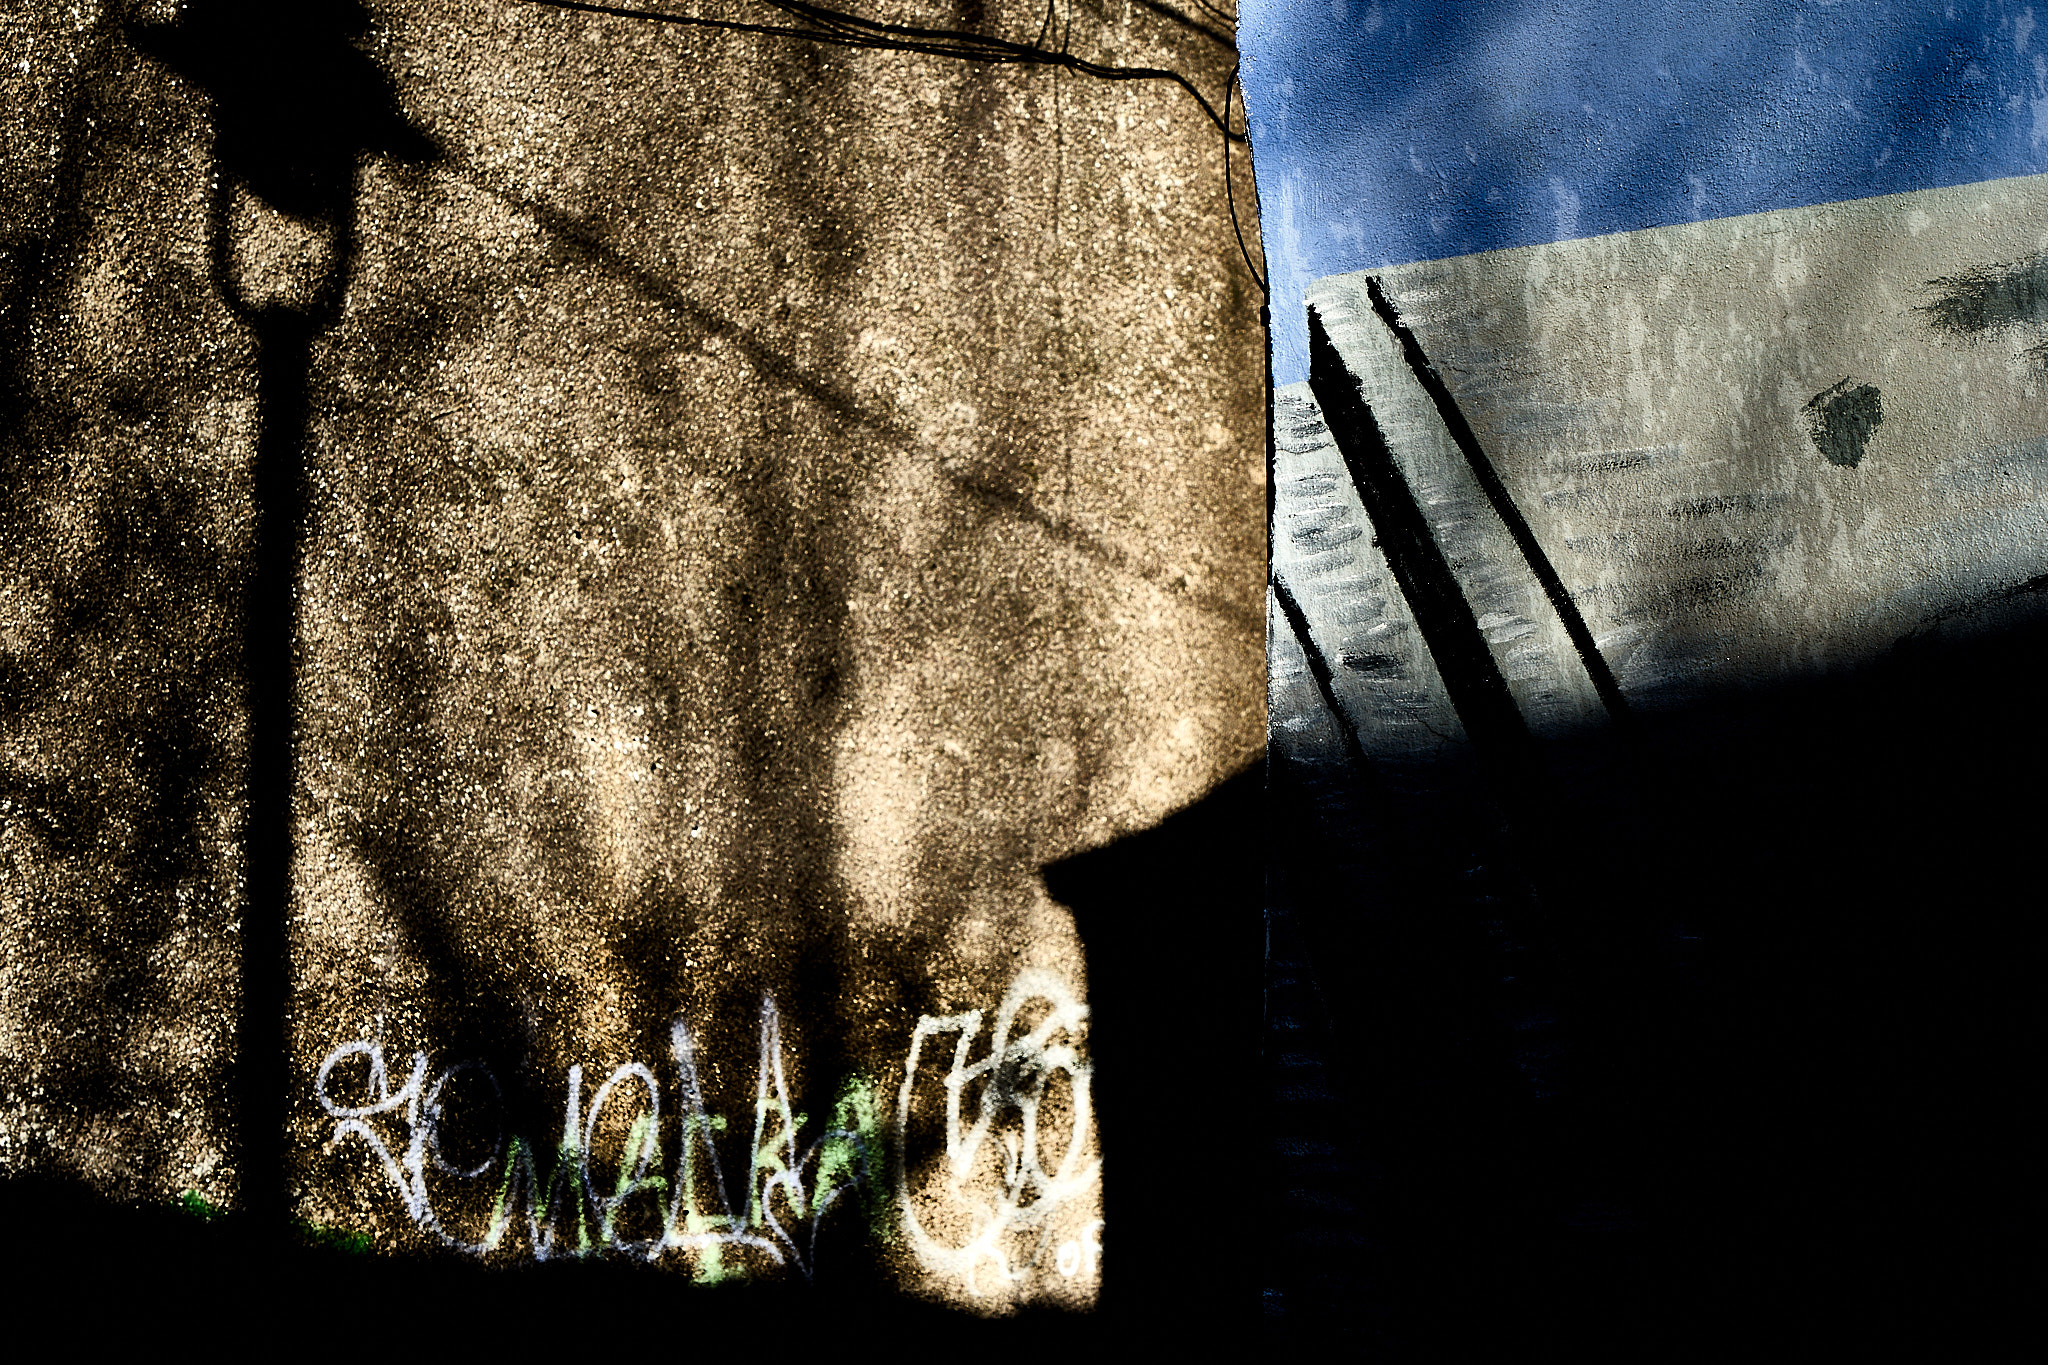 Graffiti in shadows and color...